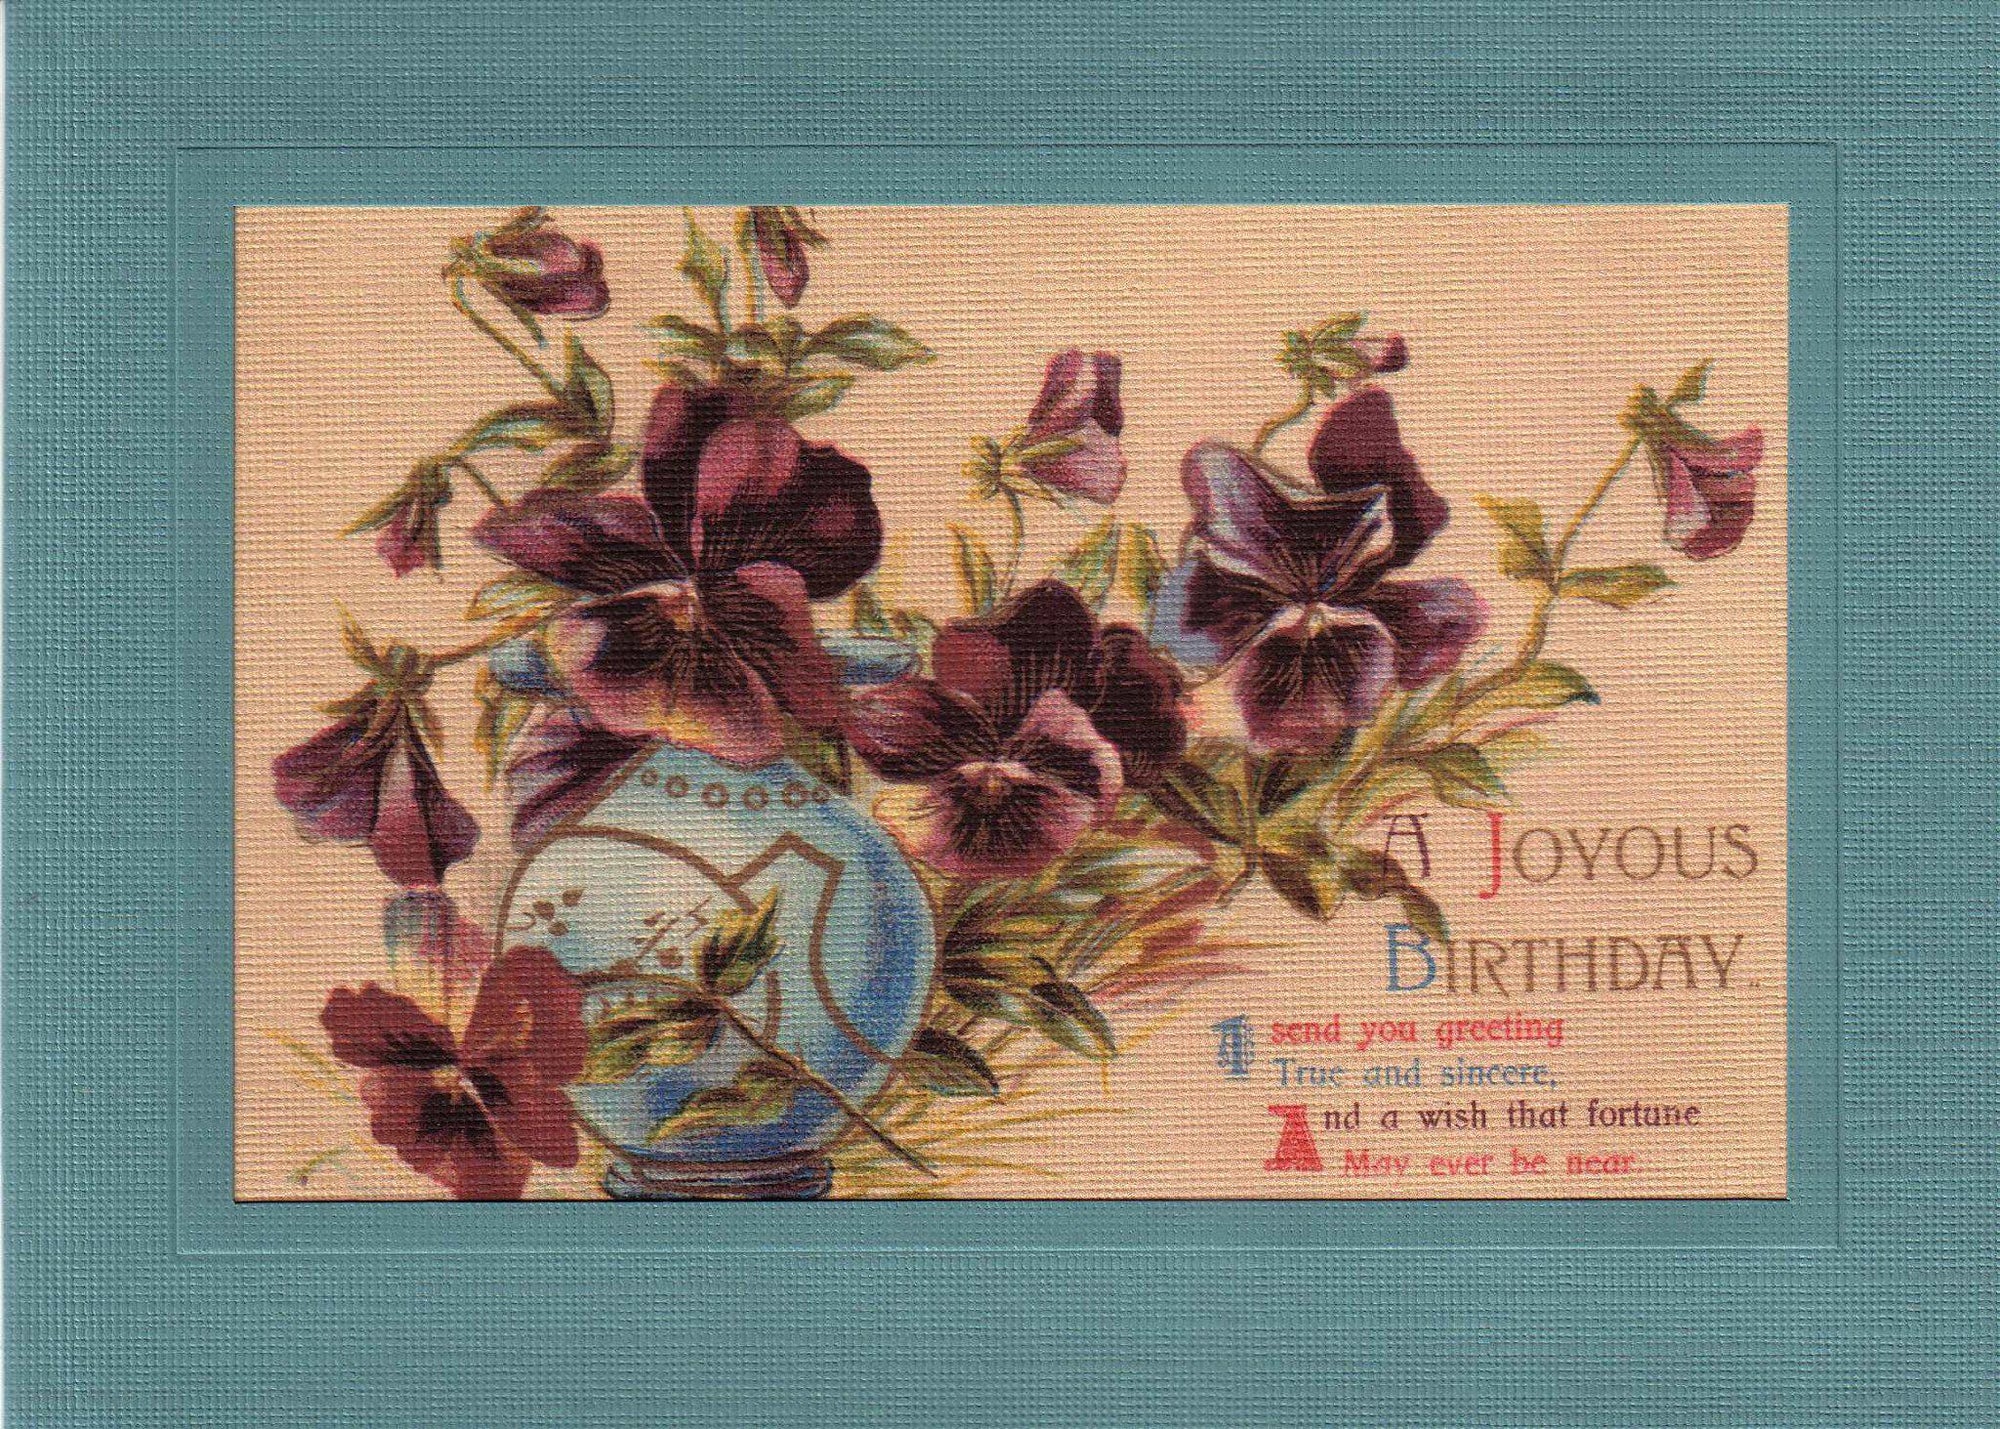 Joyous Birthday-Greetings from the Past-Plymouth Cards